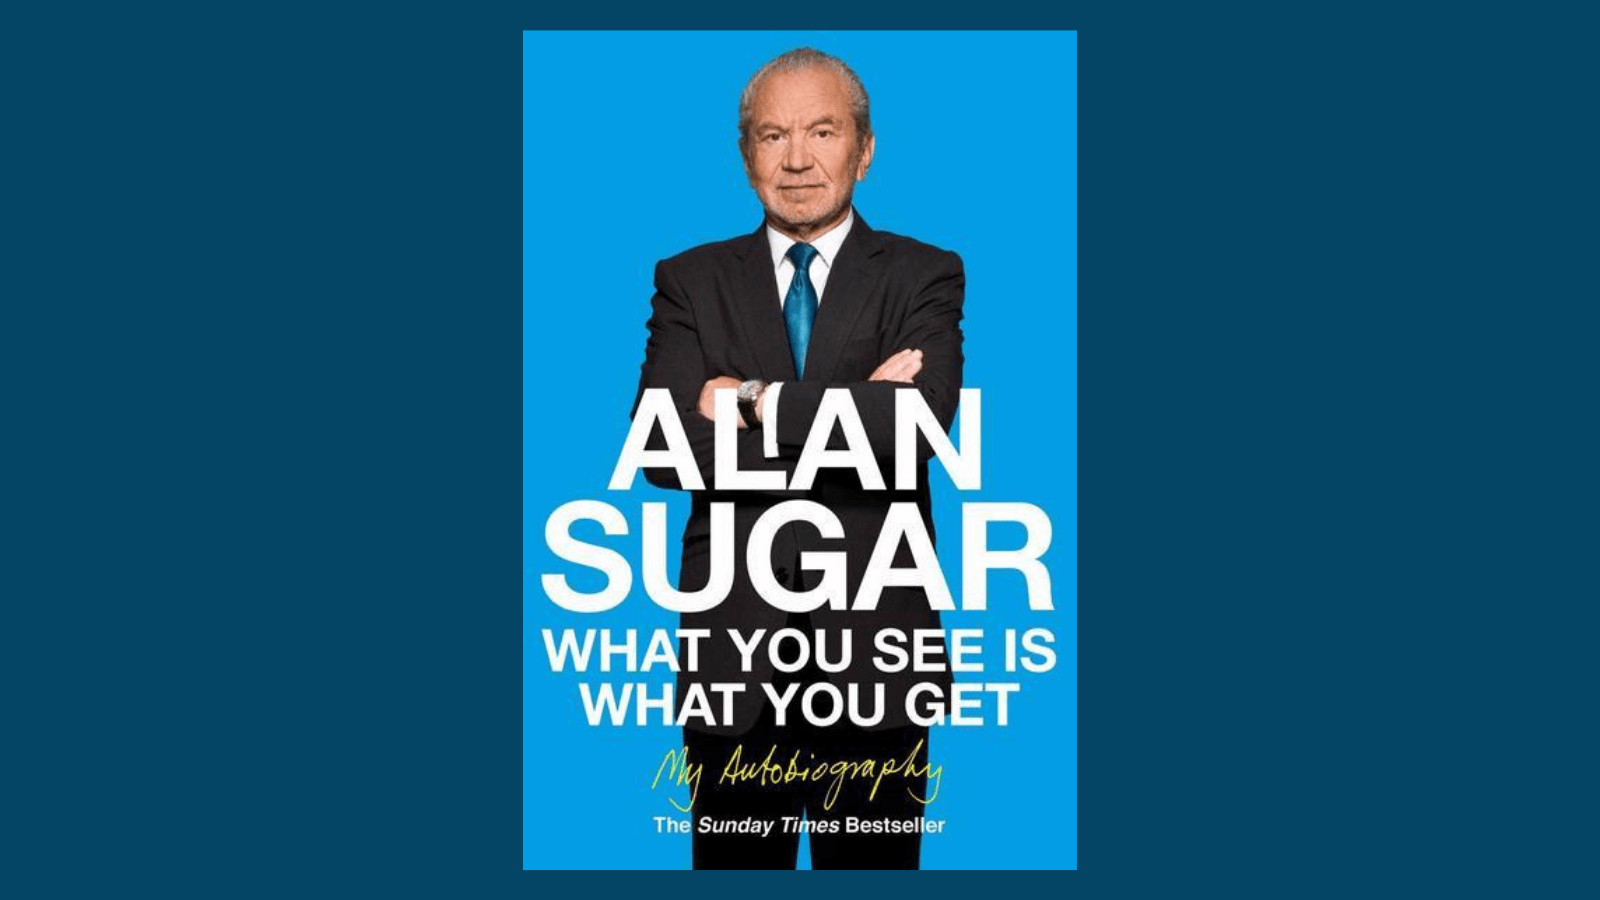 Alan Sugar - What You See is What You Get